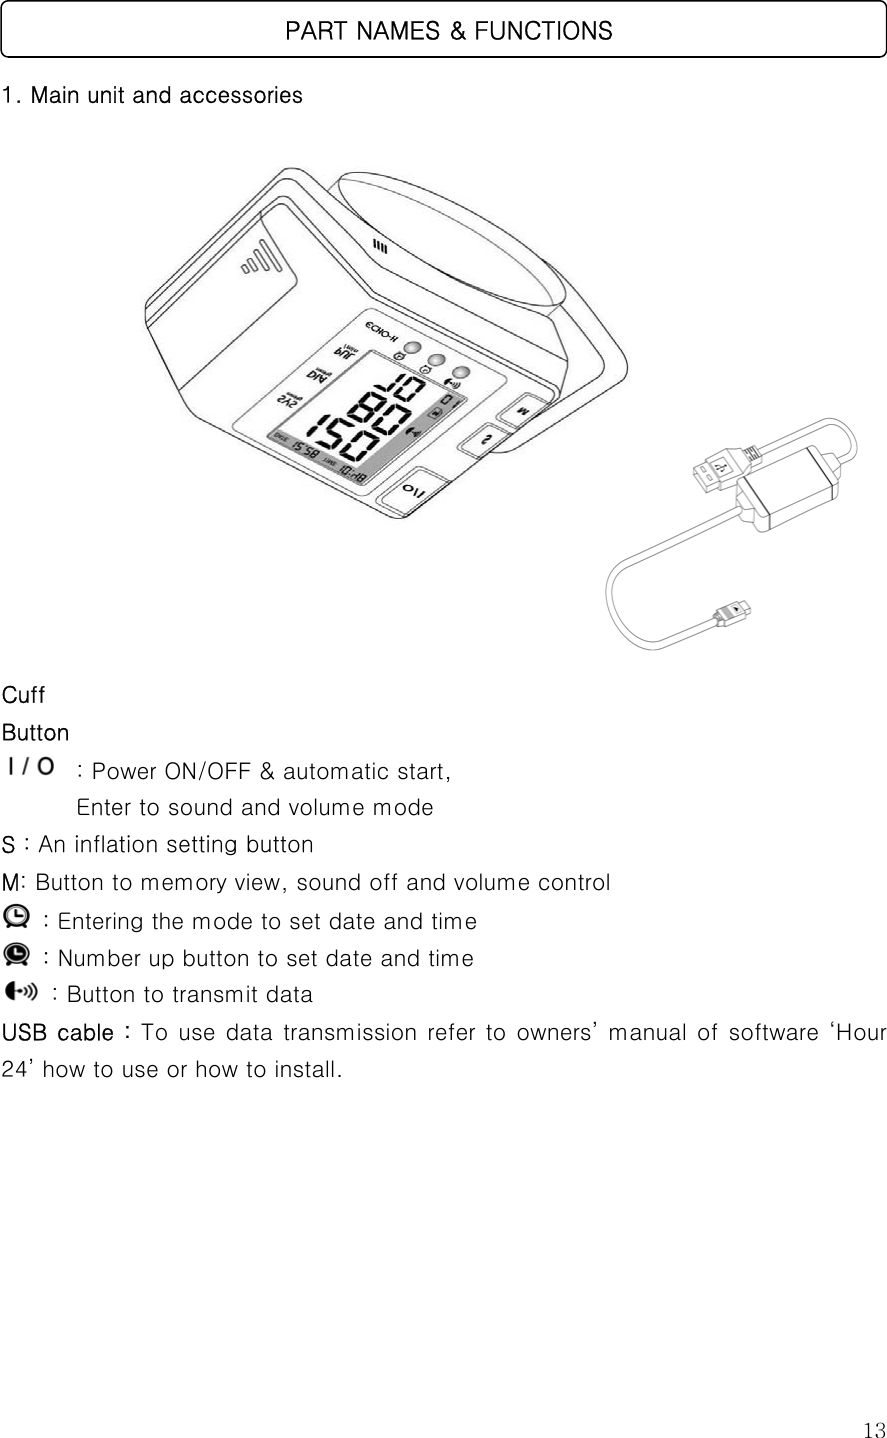  13  1. Main unit and accessories                  Cuff Button  : Power ON/OFF &amp; automatic start,    Enter to sound and volume mode S : An inflation setting button M: Button to memory view, sound off and volume control    : Entering the mode to set date and time  : Number up button to set date and time   : Button to transmit data USB cable : To use data transmission refer to owners’ manual of software ‘Hour 24’ how to use or how to install.         PART NAMES &amp; FUNCTIONS 